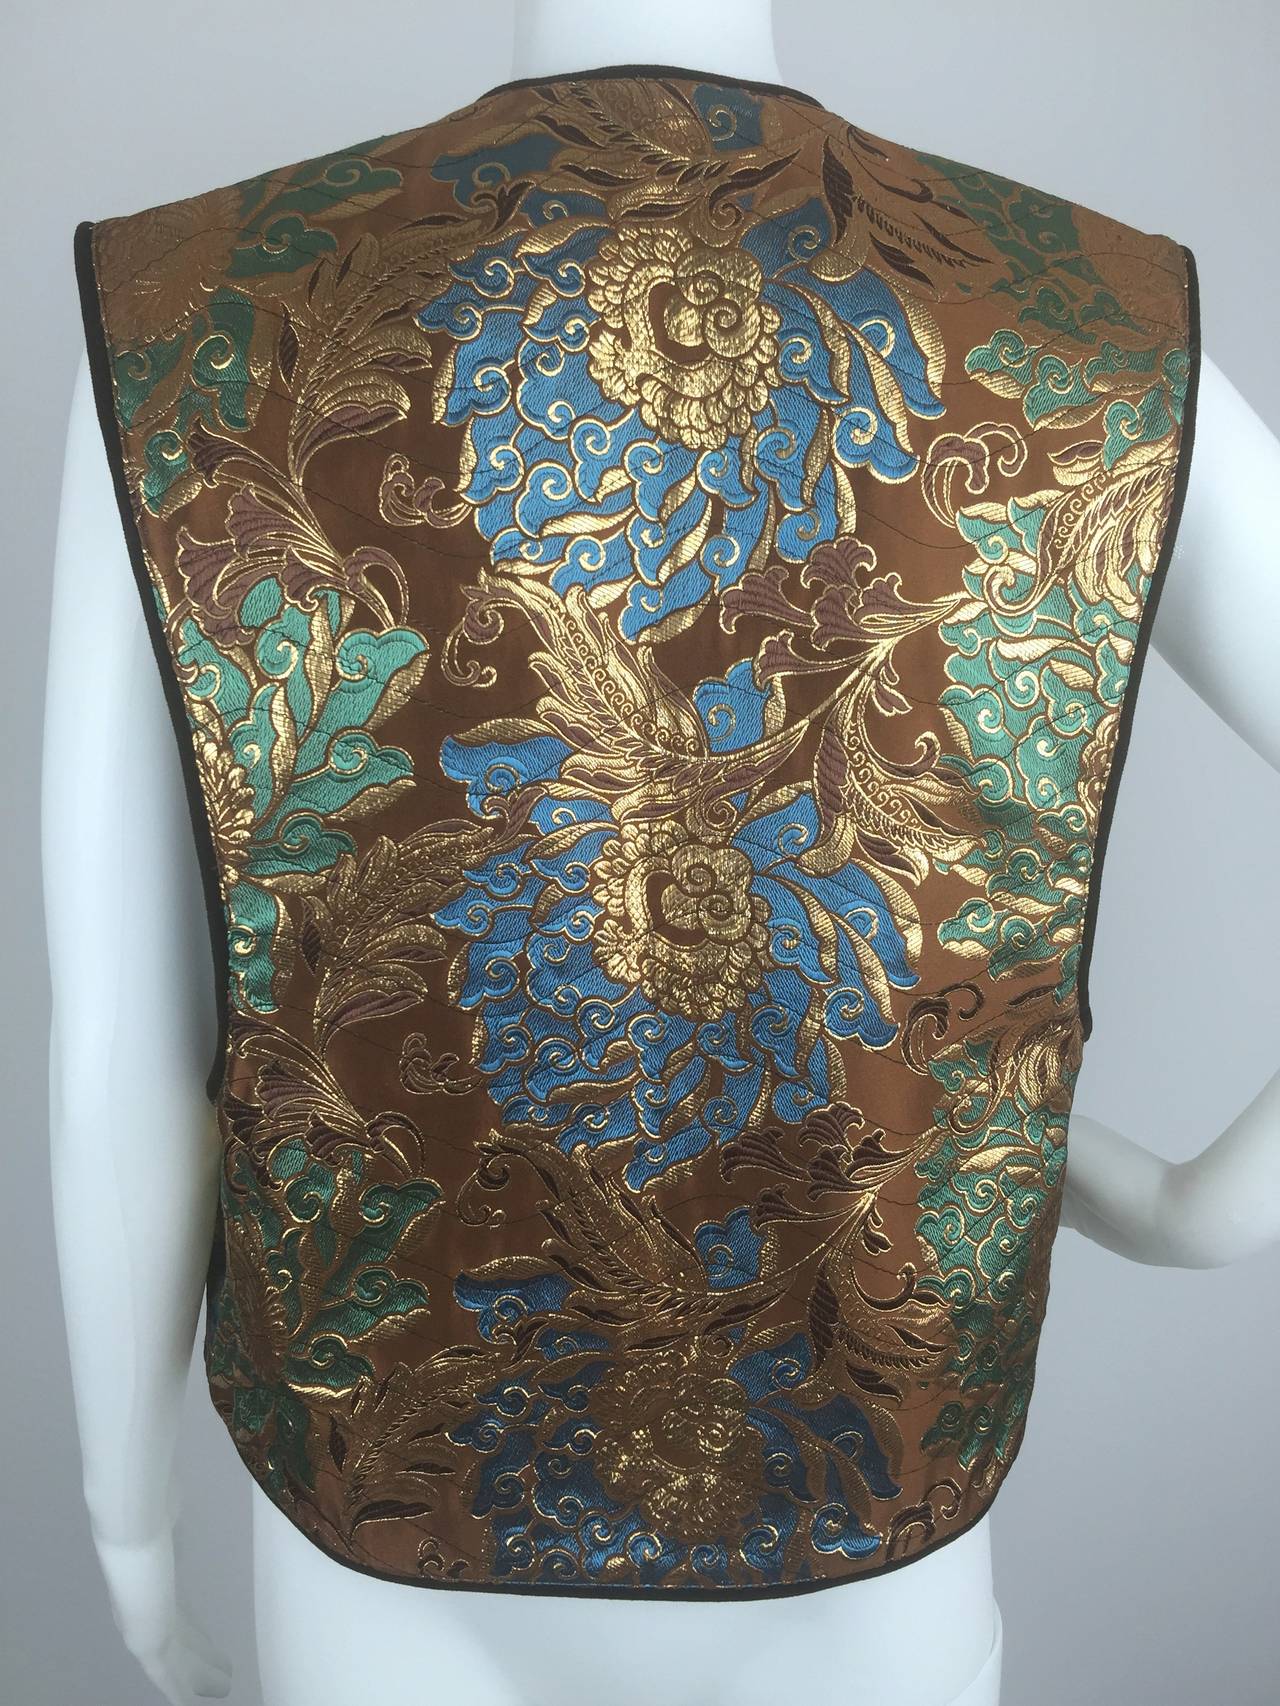 Late 1960's Camerino brocaded vest of metallic gold thread on quilted satin.  Lined in brown velvet.  Deeply cut sleeves.  

Simple clean lines allow the luxurious, Asian inspired, decoration to take center stage.  

Closes with her signature